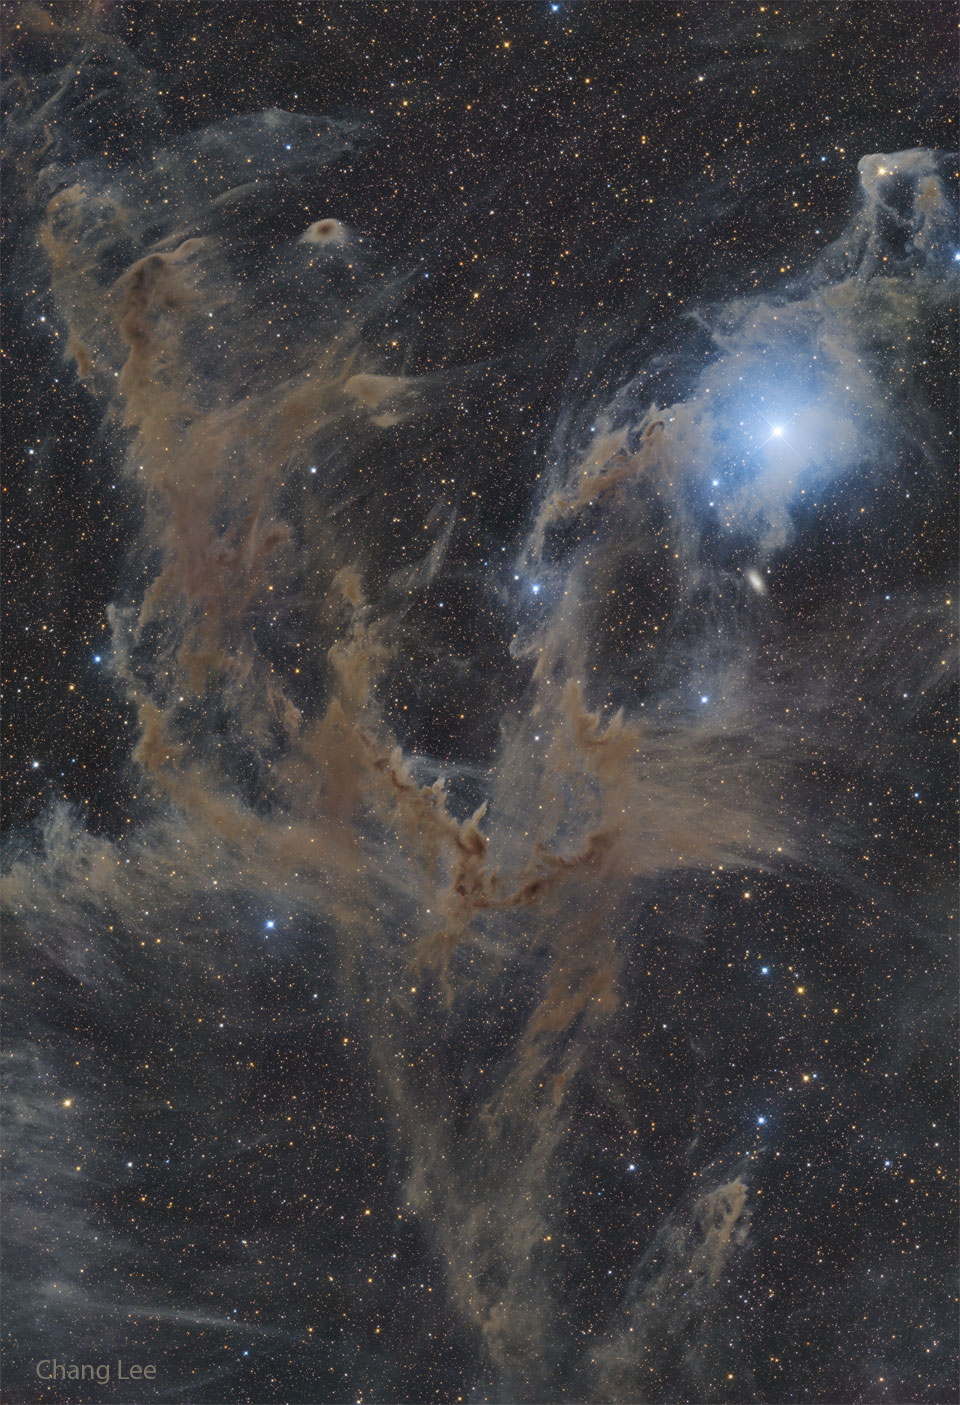 The featured image shows a dark nebula complex involving thick dust appearing brown and making a big